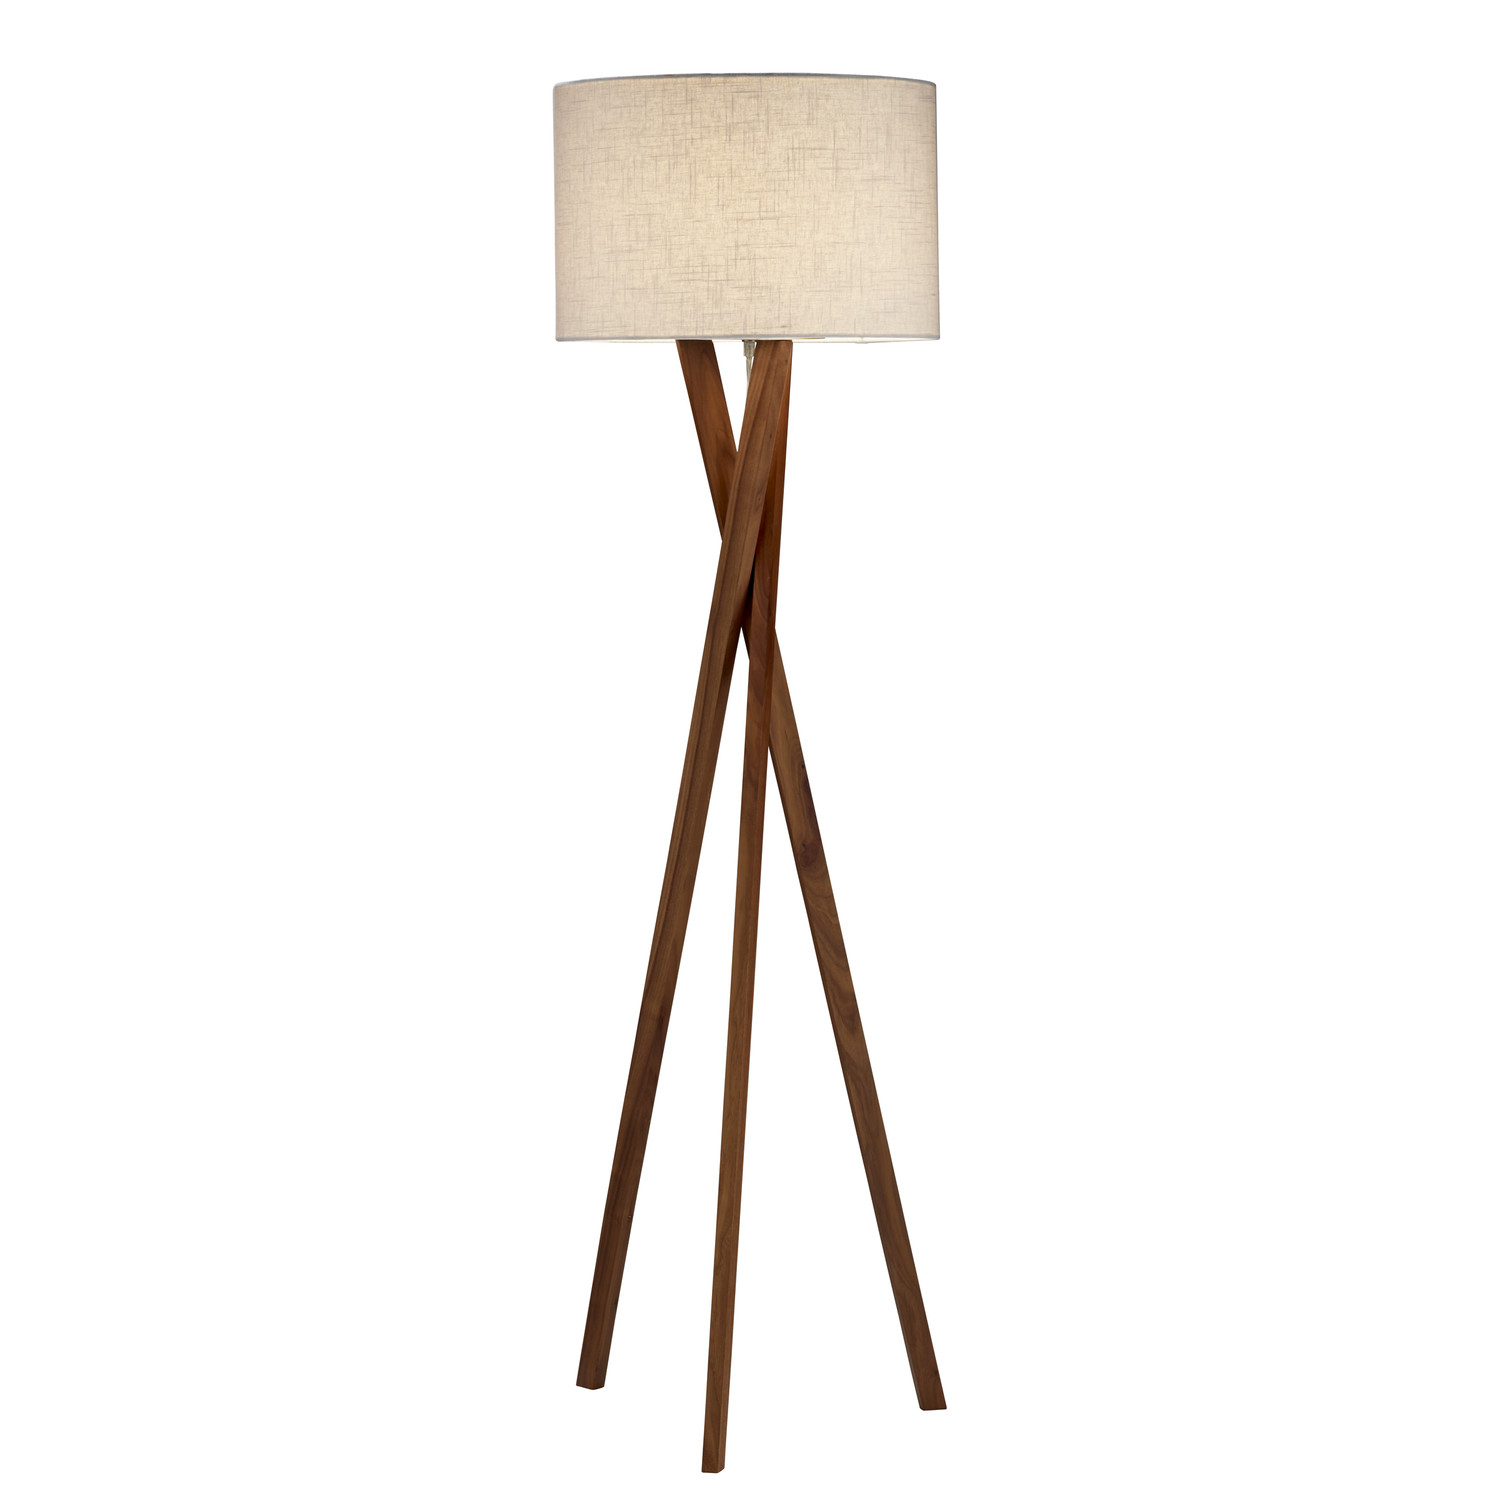 Modern Romantic Floor Lamp Wooden Trend Including Image Q Au within size 1500 X 1500